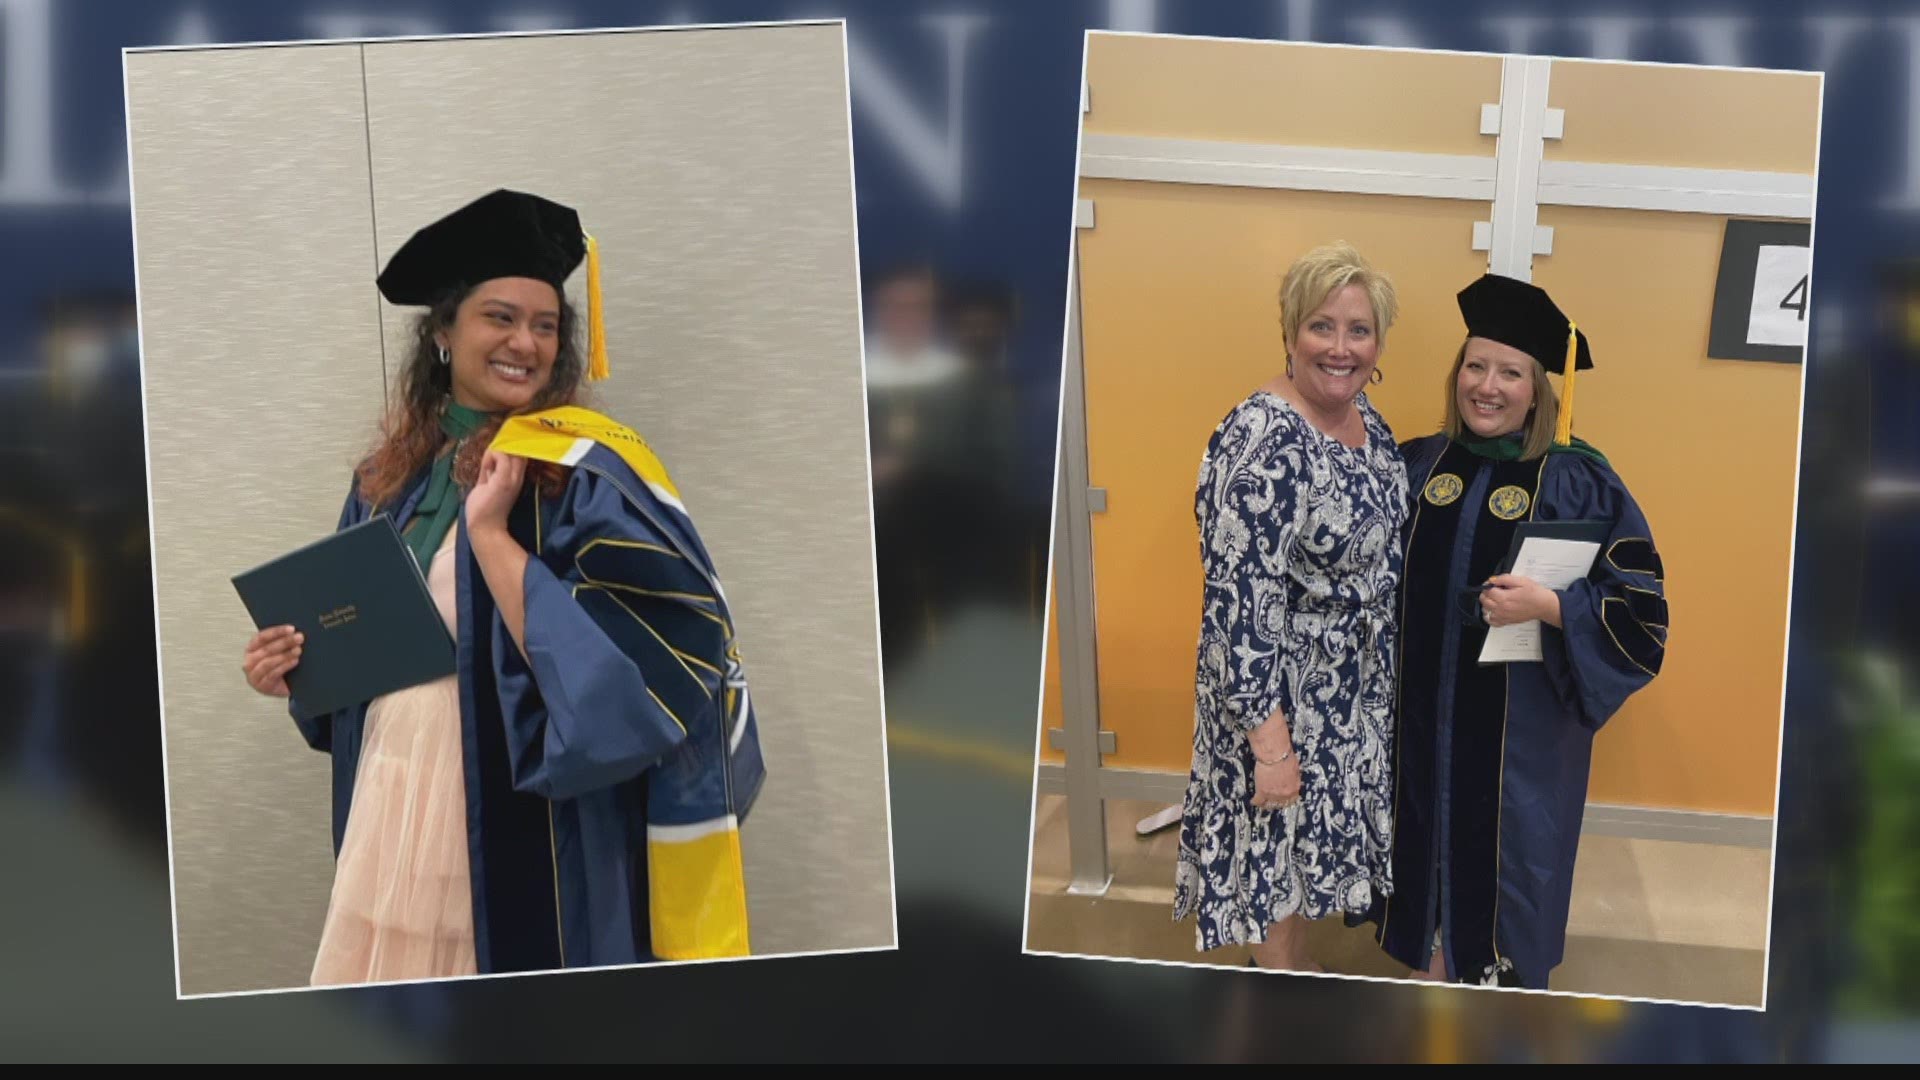 Two medical students walked across the stage on Sunday. For them, getting their diplomas meant so much more after months of personal struggles relating to COVID-19.